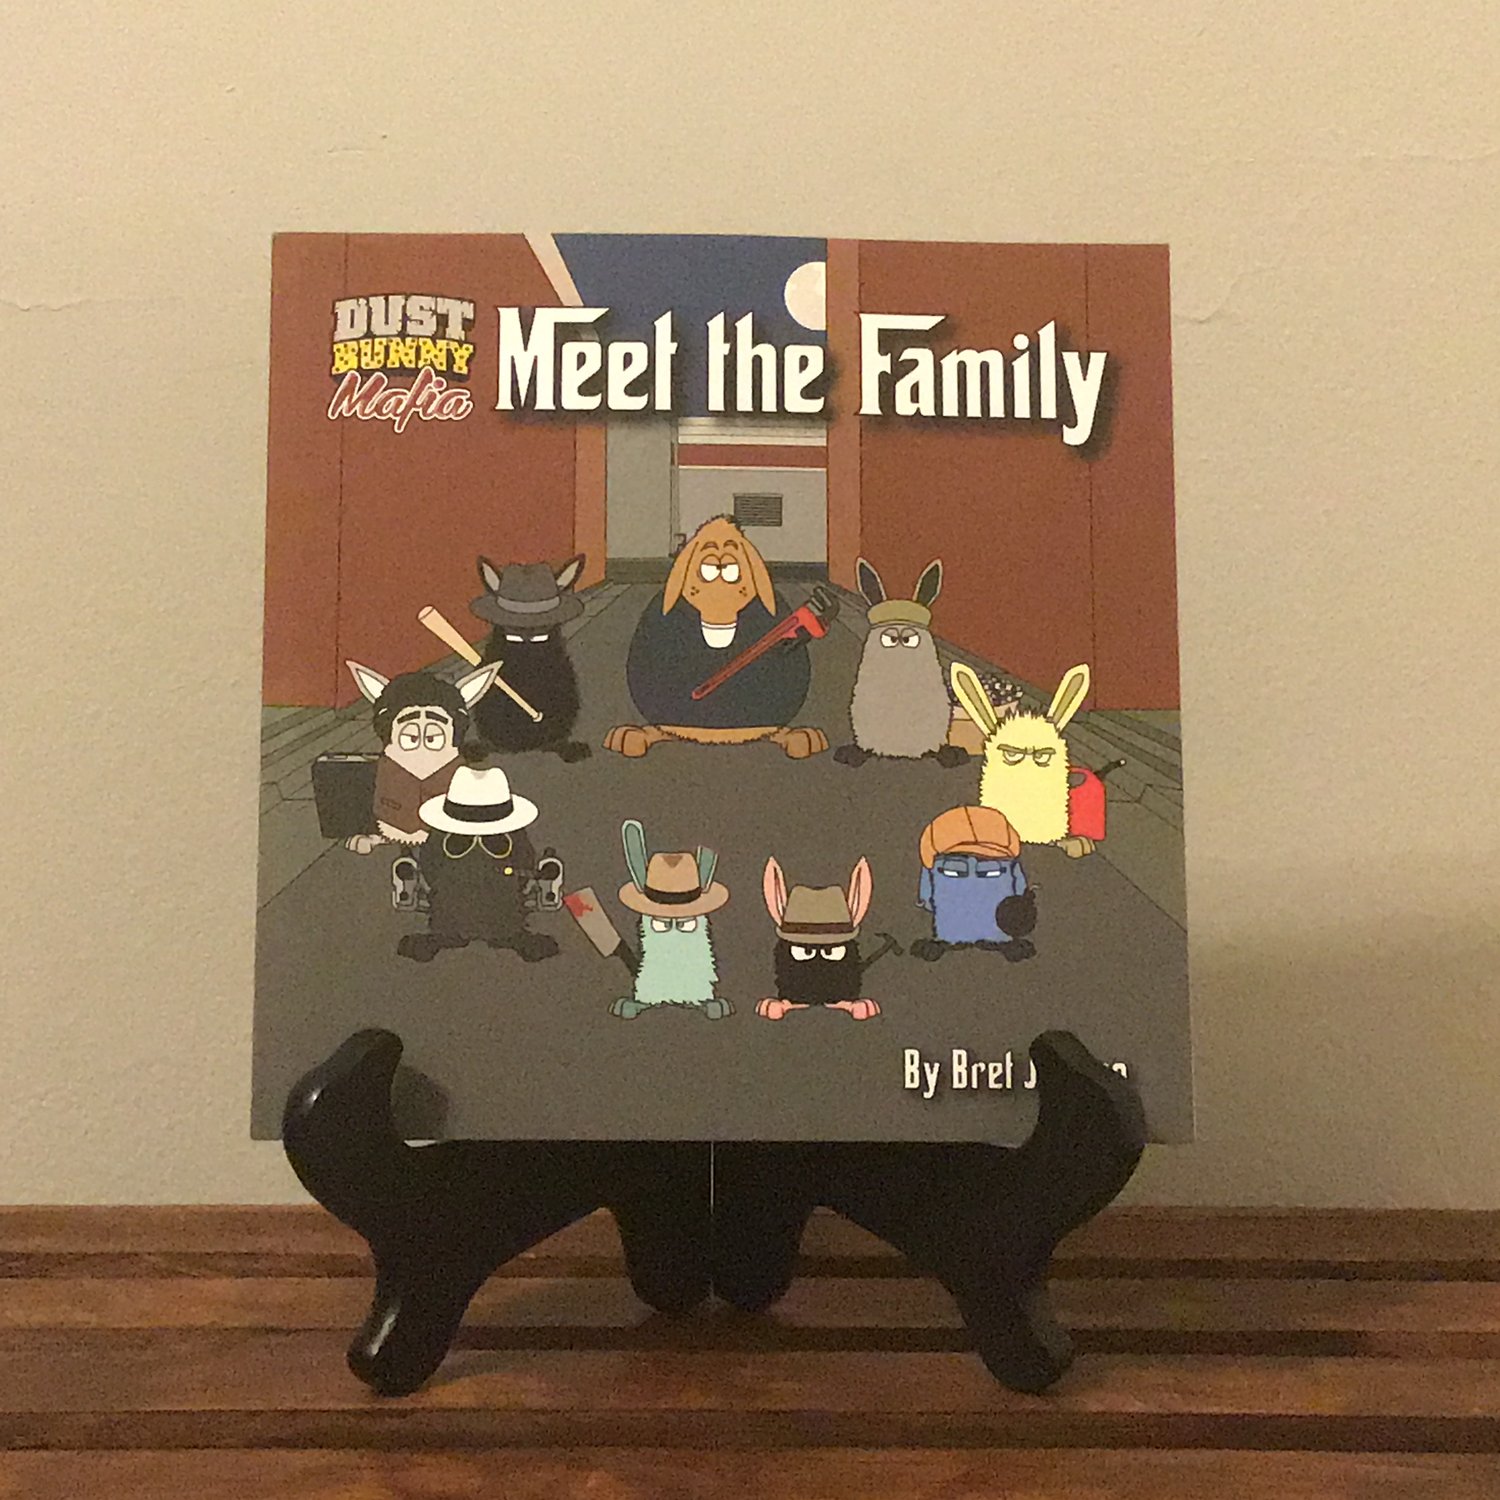 Meet the Family (A Dust Bunny Mafia Collection) (Volume 1)